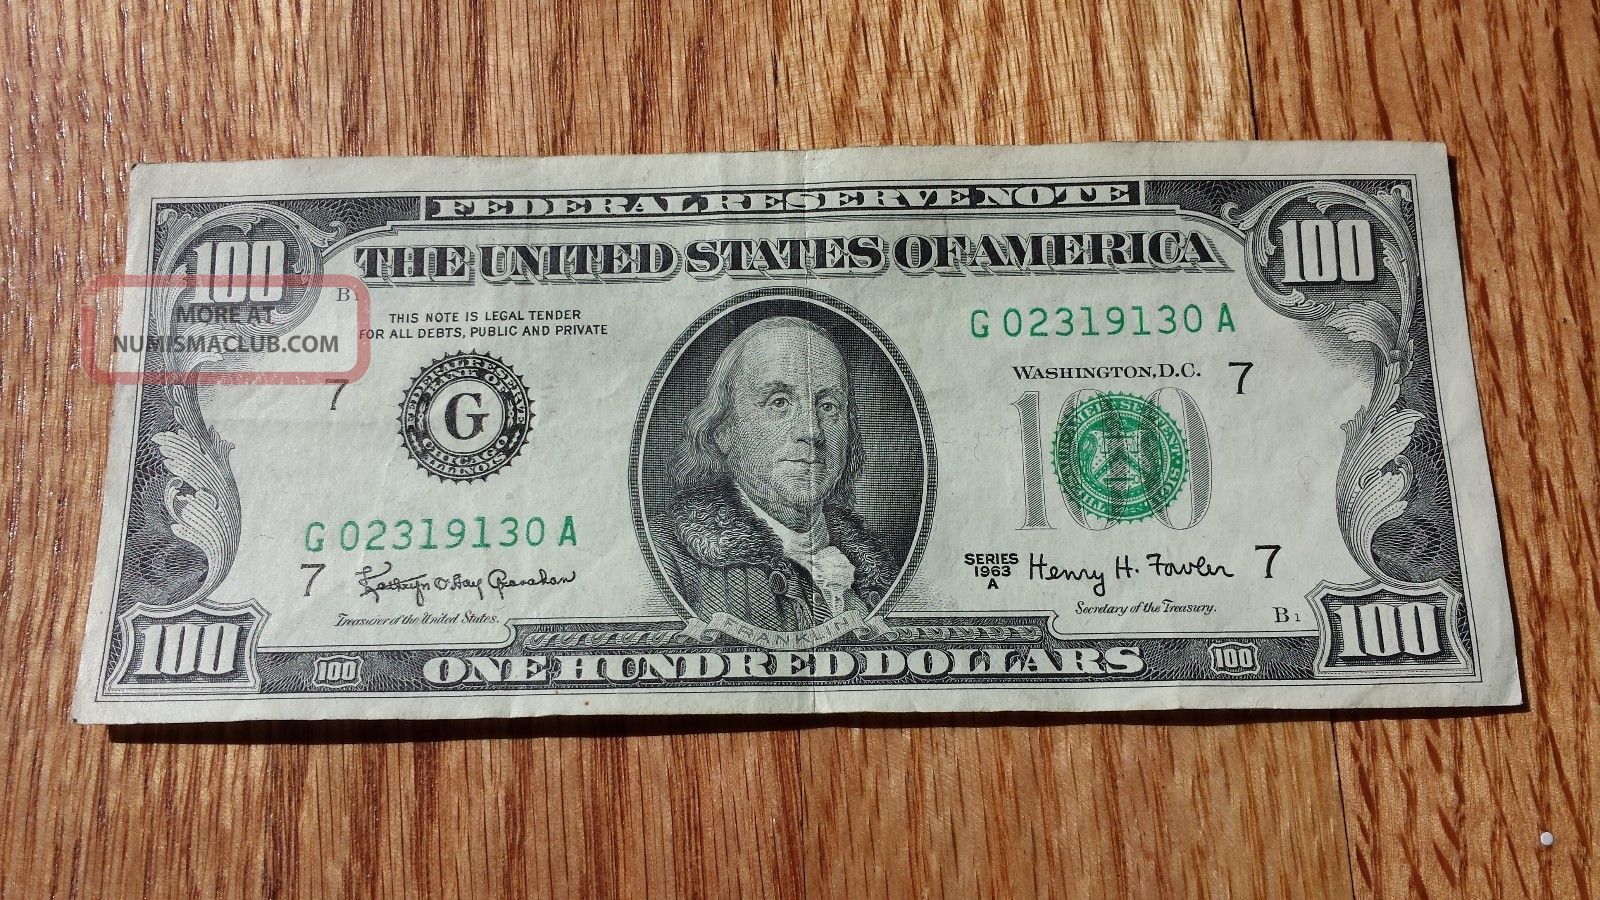 $100 Usa Frn Federal Reserve Note Series 1963a G02319130a Vintage Awesome Small Size Notes photo